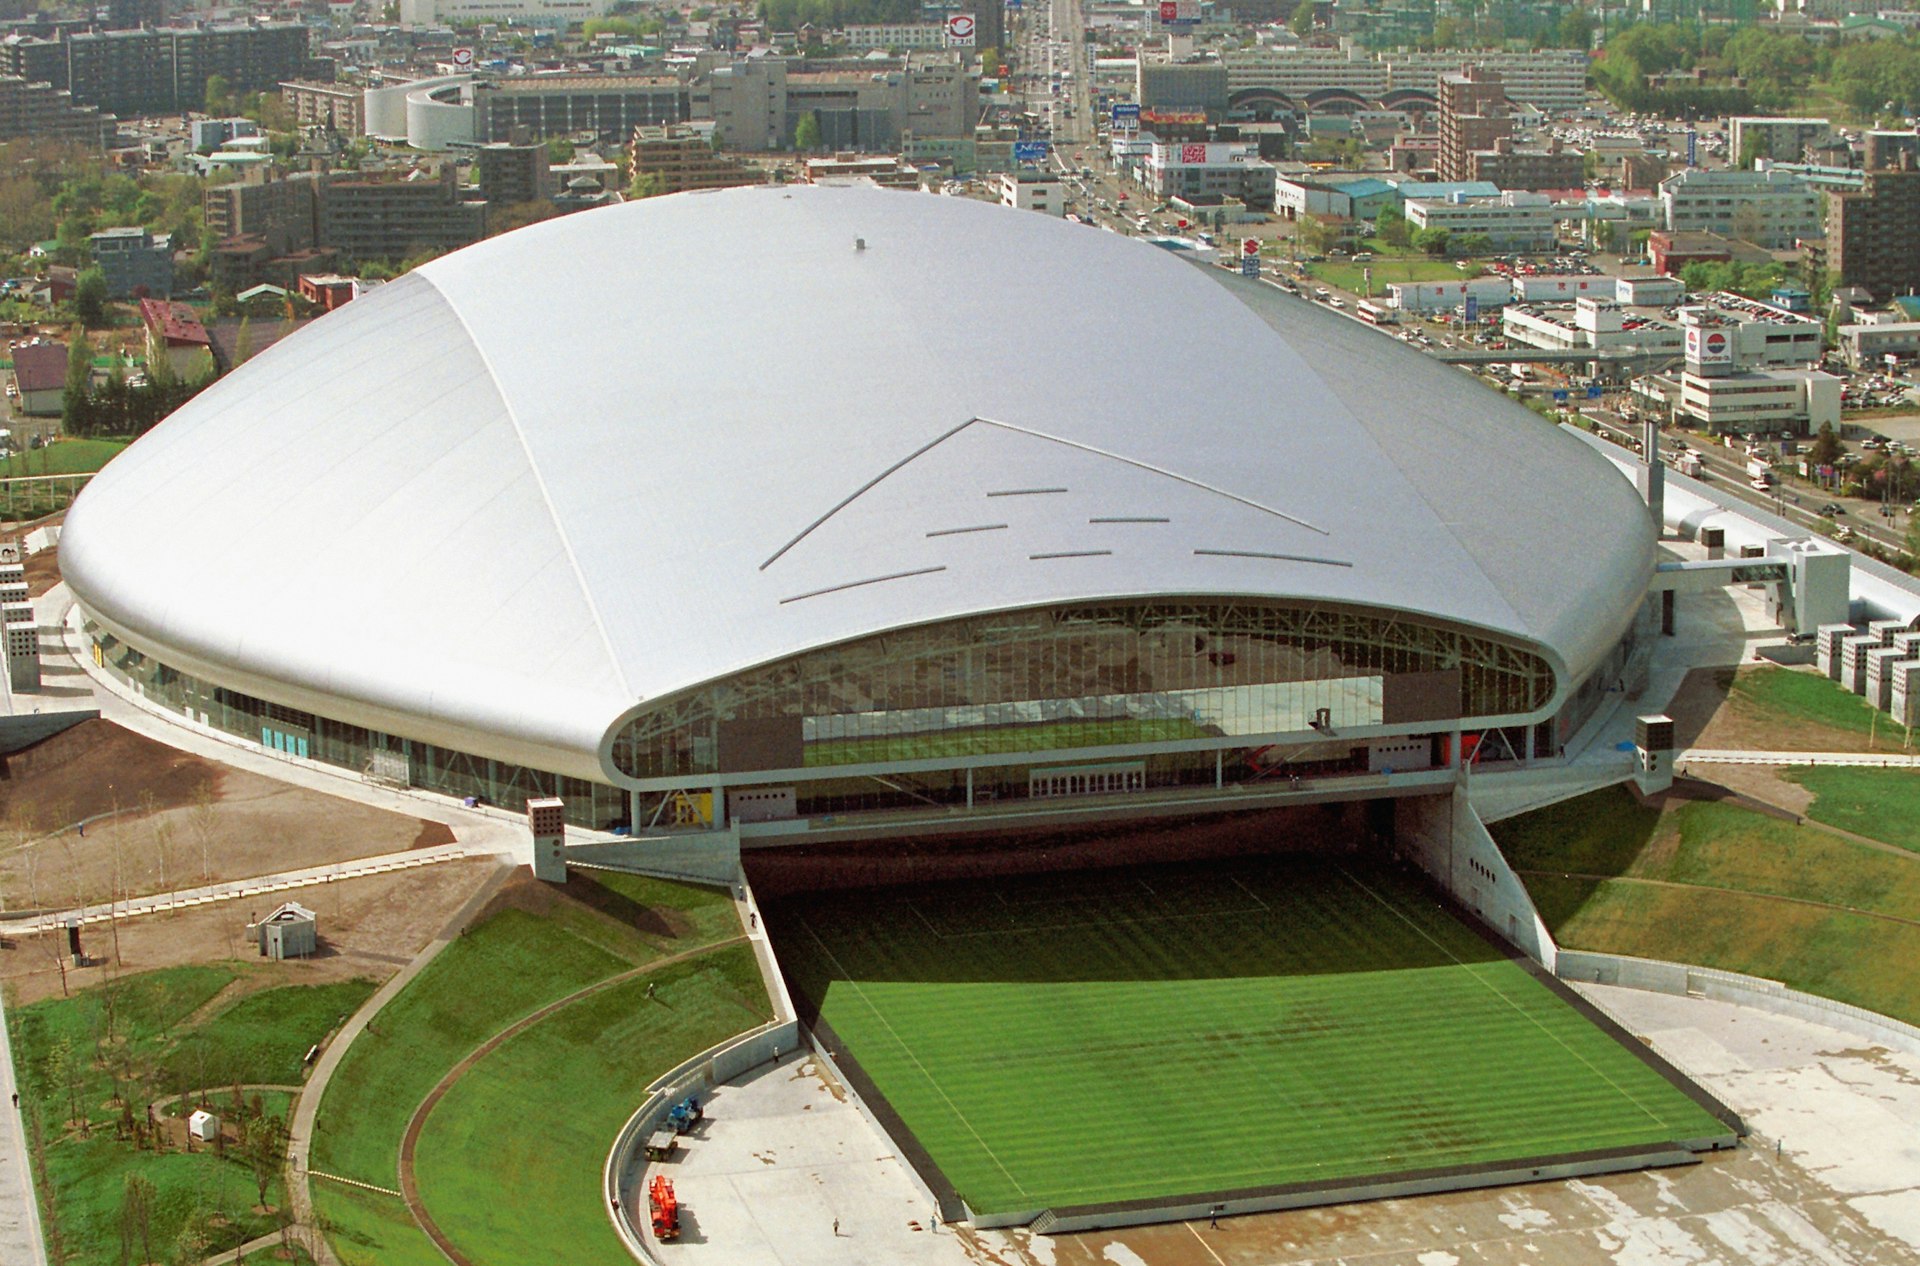 An aerial view of the Sapporo Dome stadium in Sapporo. The stadium is perfectly circular with a sloping domed roof that covers the pitch. City buildings are visible around it.